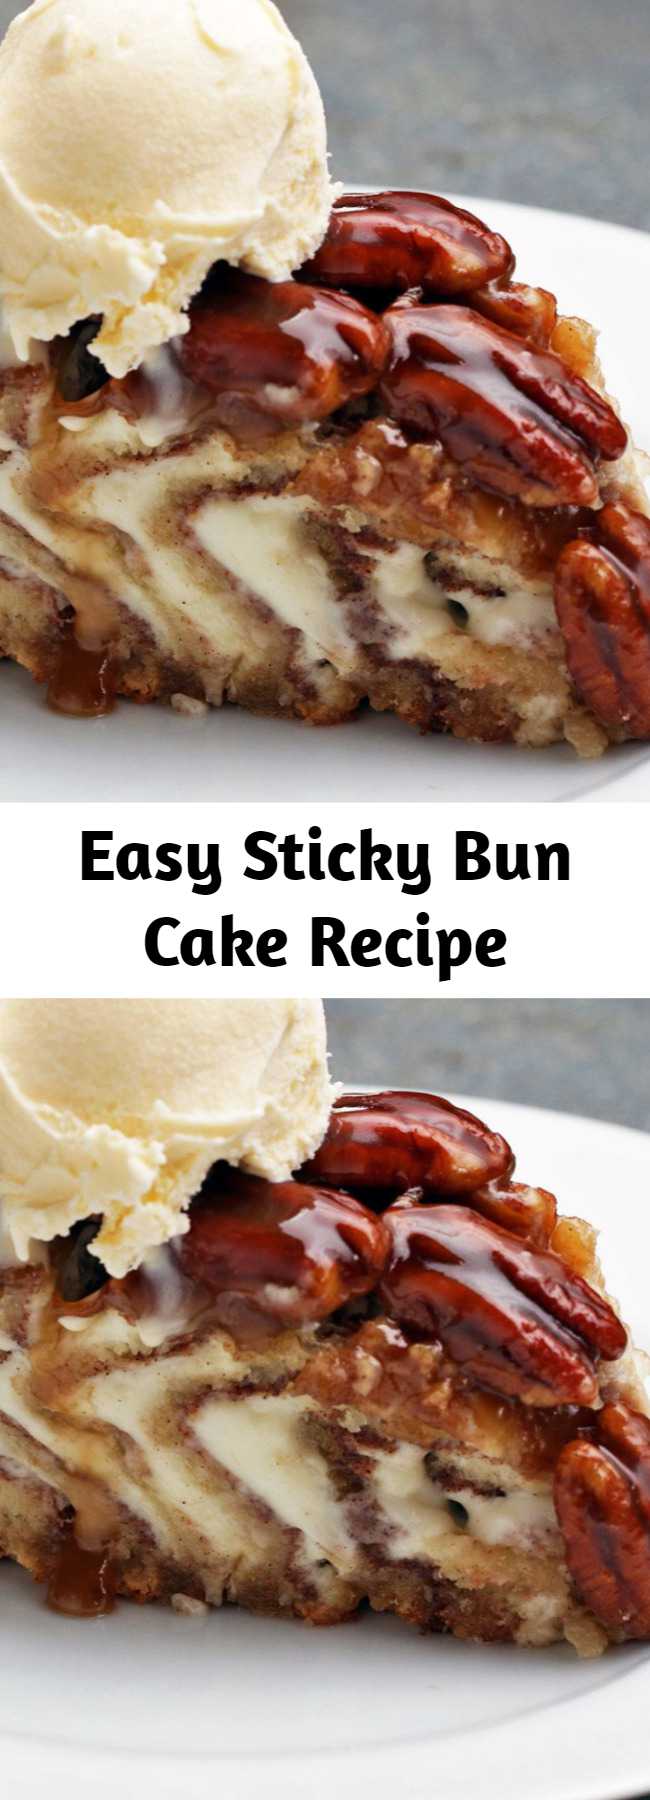 Easy Sticky Bun Cake Recipe - A giant French toast cinnamon roll is the perfect centrepiece for family brunch.  Satisfy the sweet-tooths at the table with this show stopper.  Easy to make and takes like cinnamon buns!!